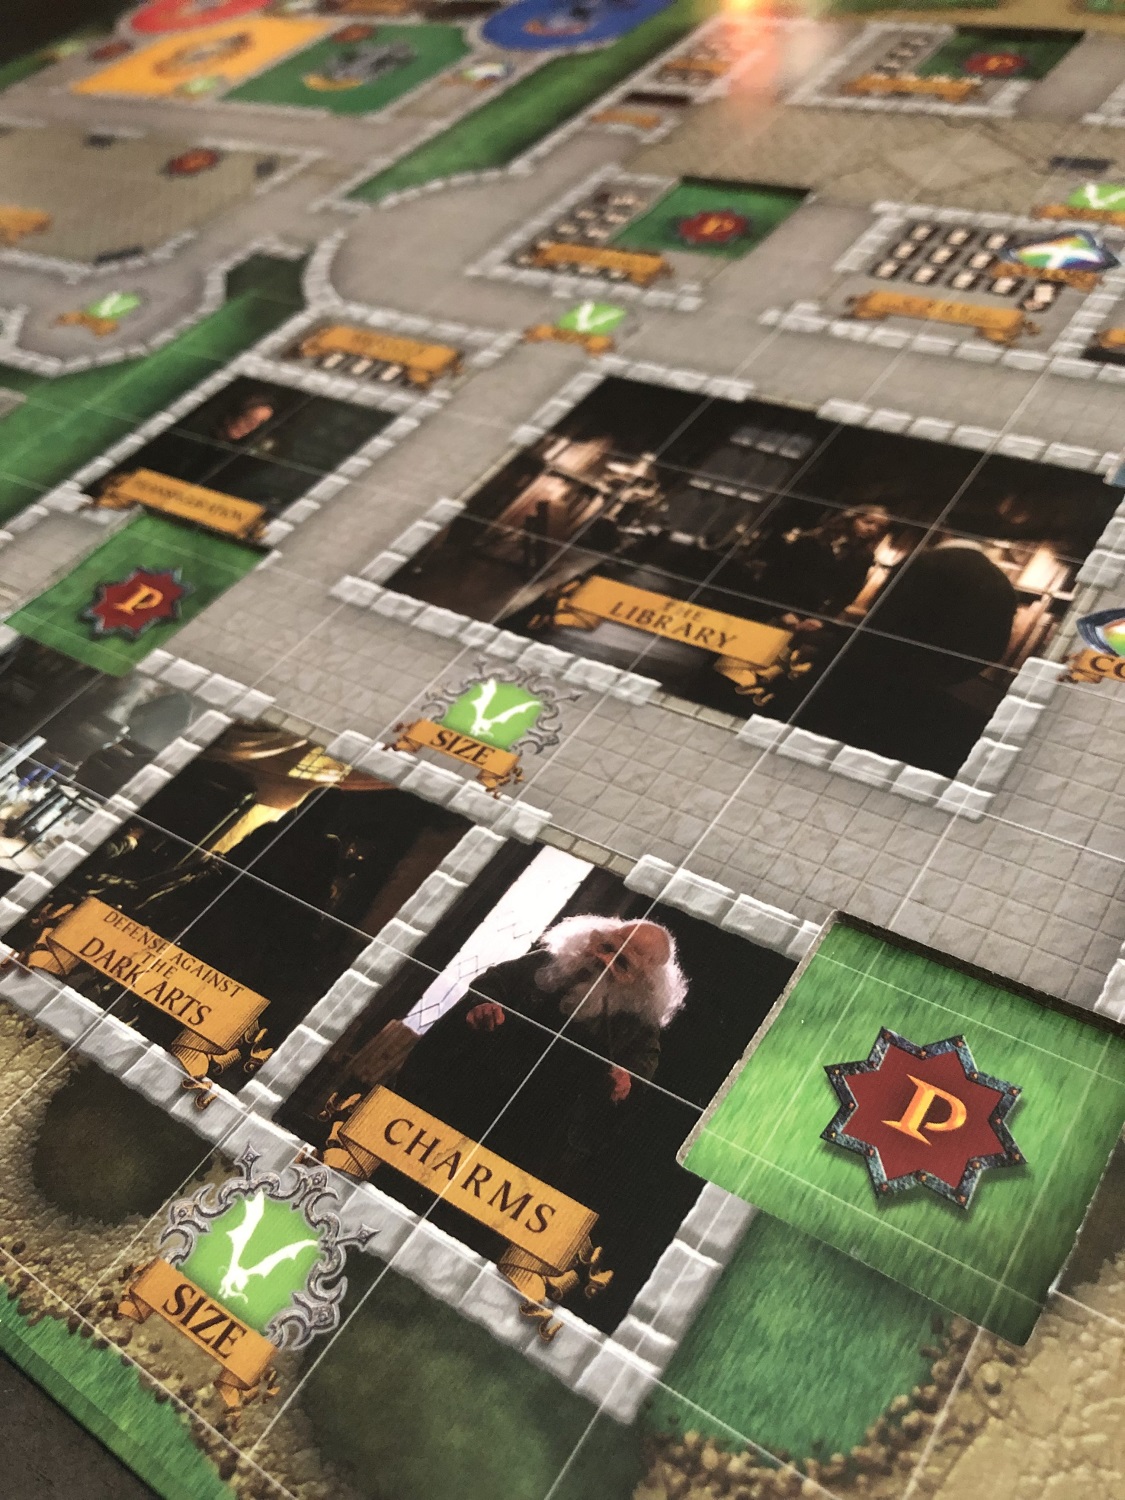 Harry Potter Magical Beasts – Hogwarts side of the game board